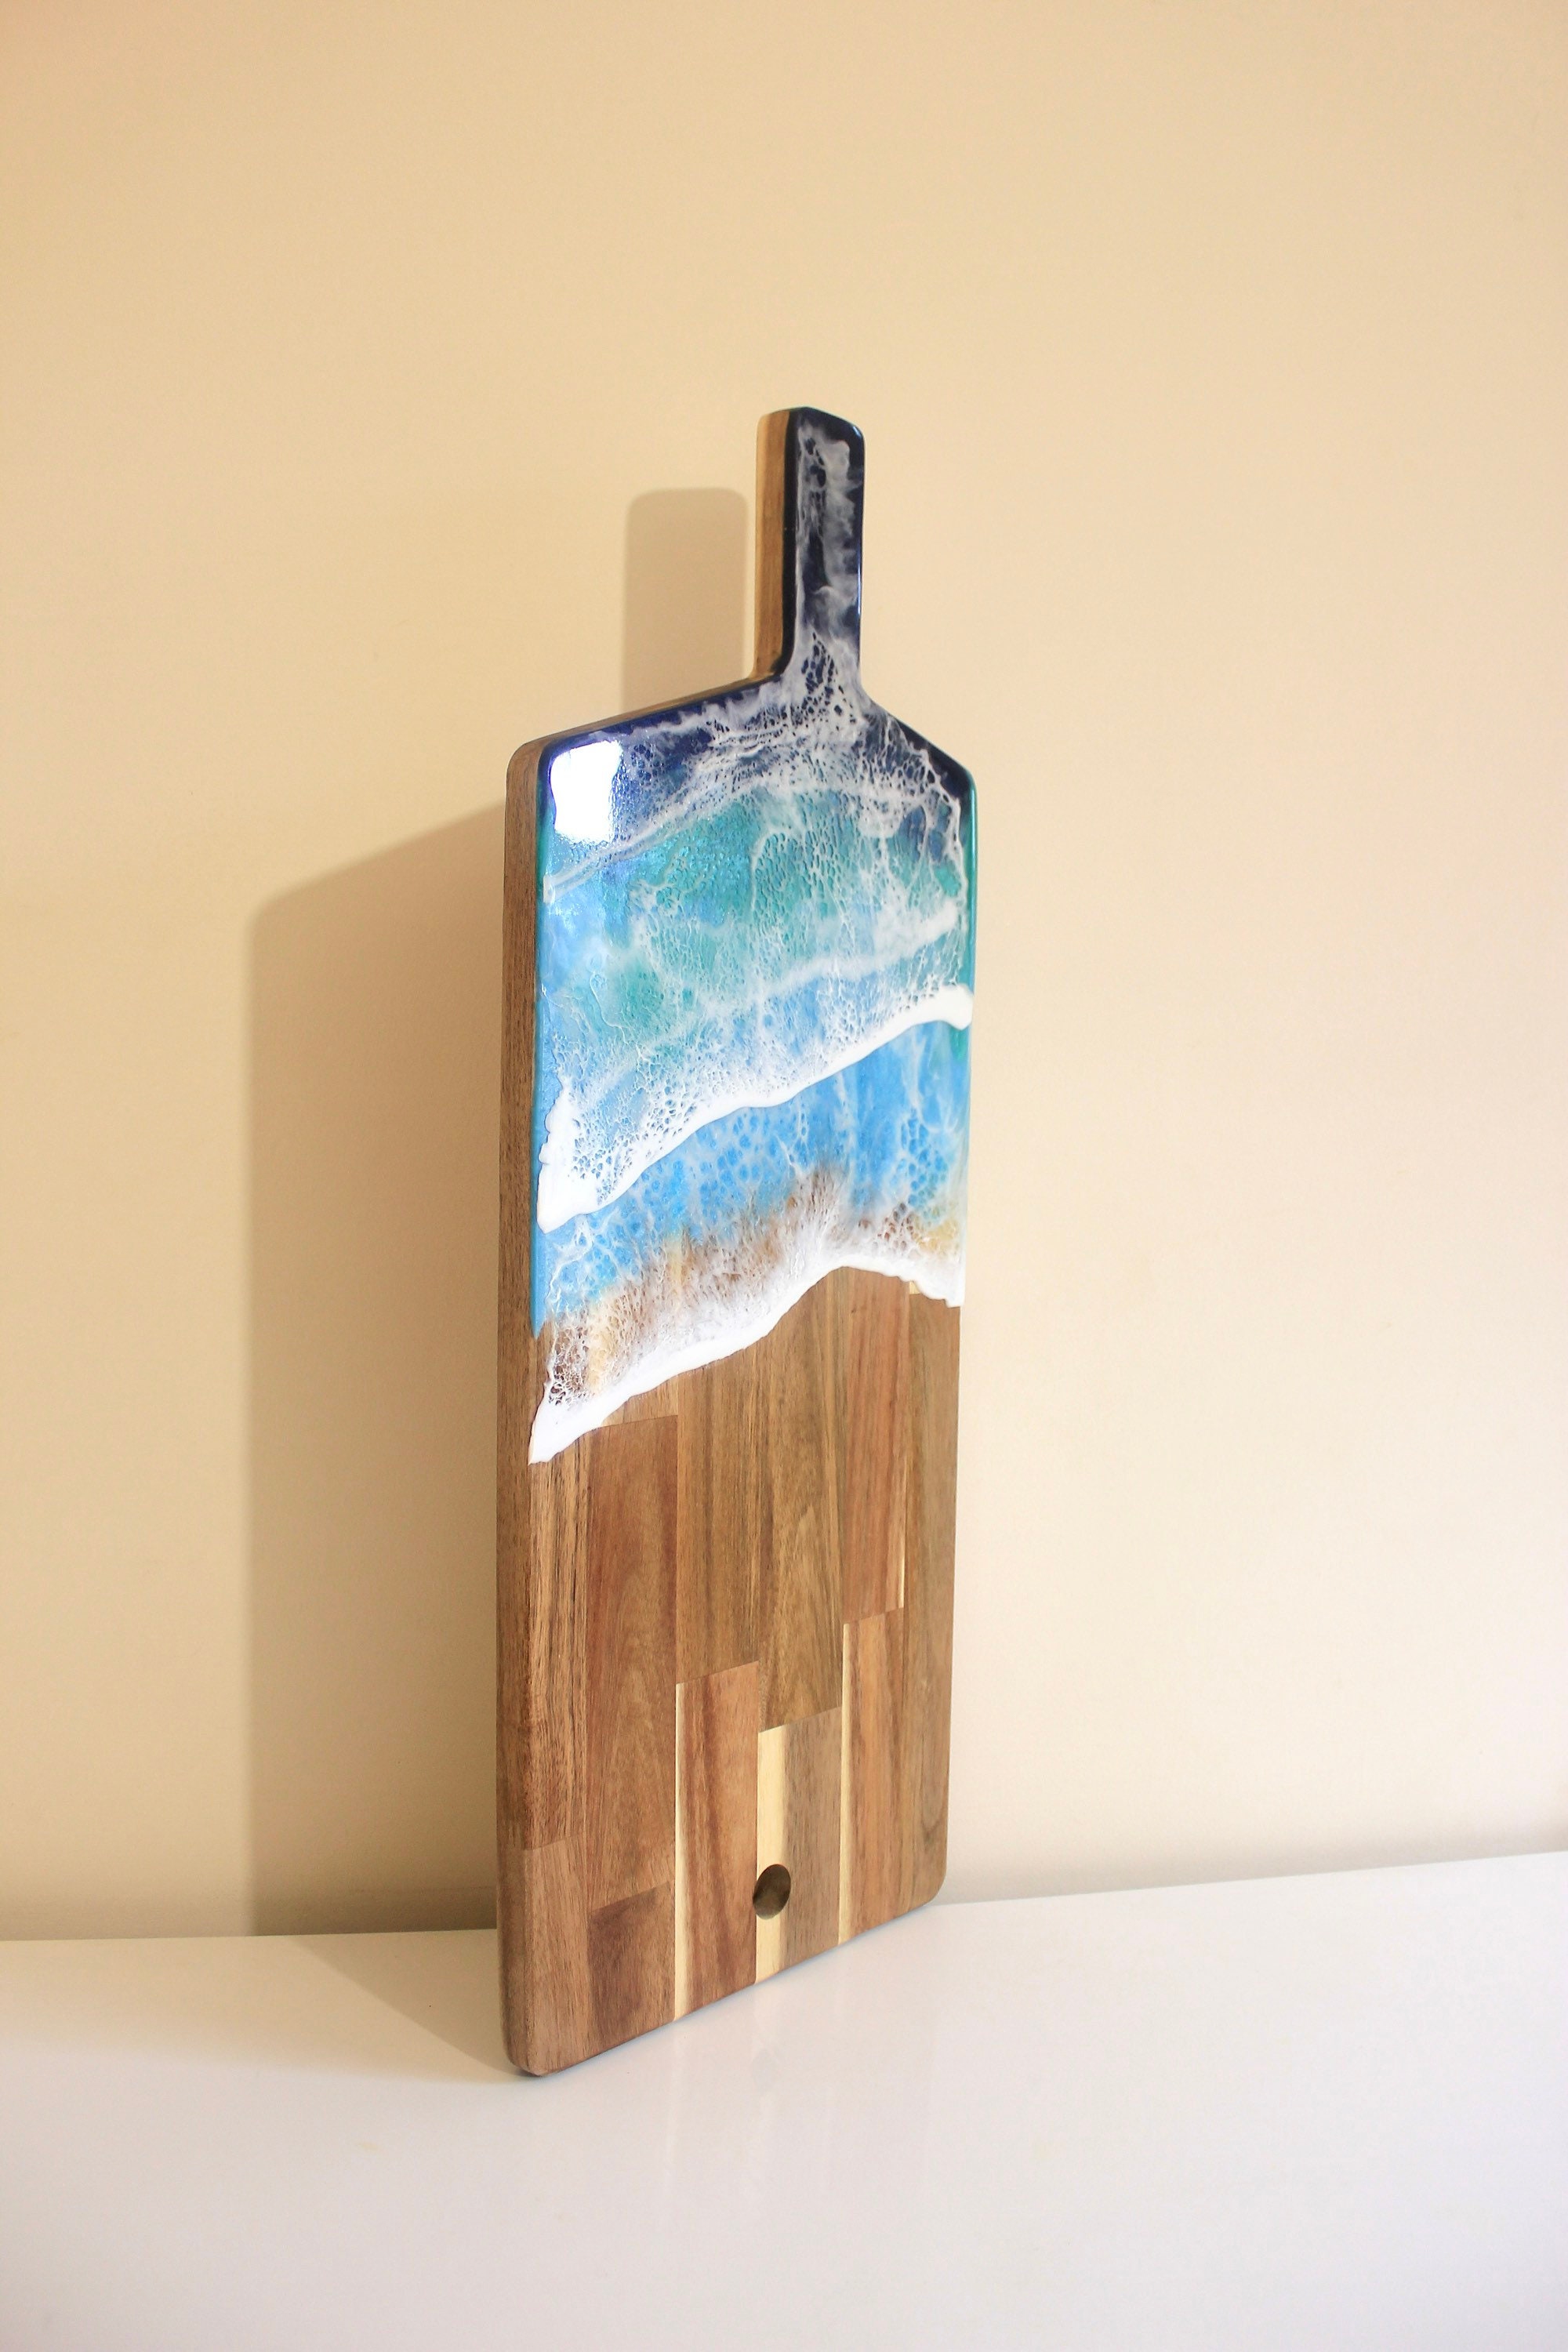 Cutting Board Made of Food Safe Epoxy Resin With Resin Art Elements 